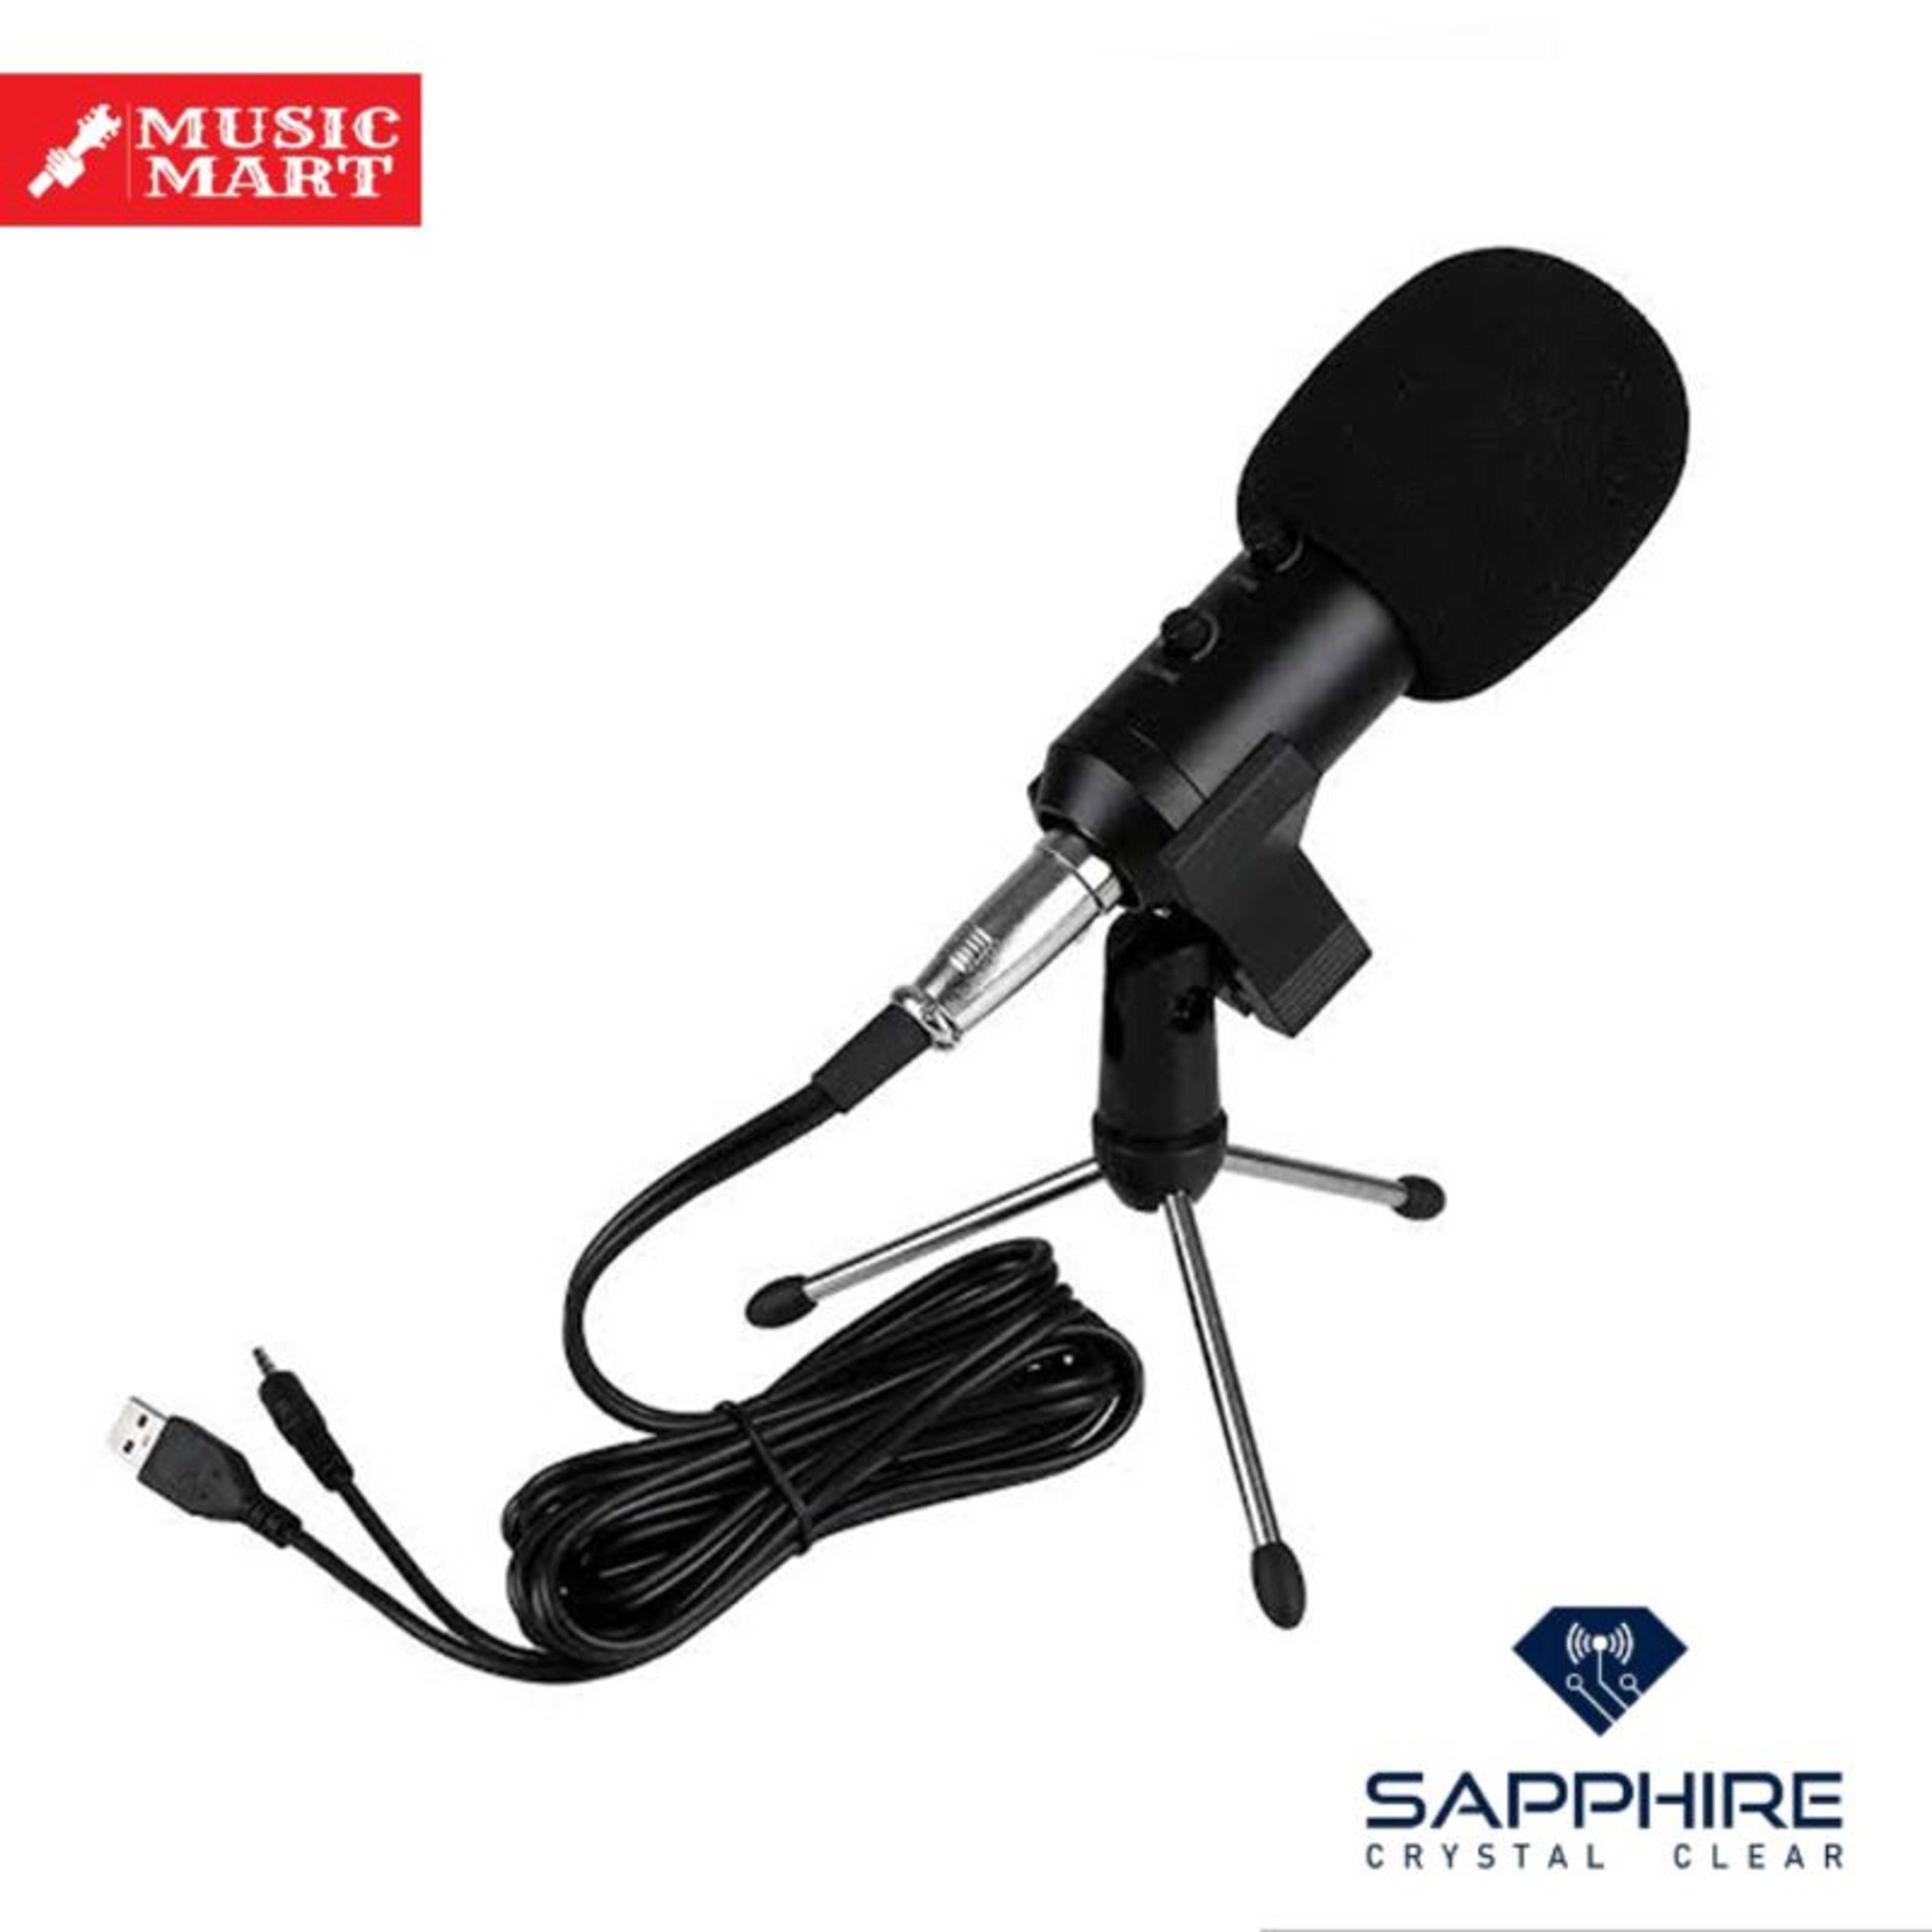 DESKTOP PROFESSIONAL  MICROPHONE KIT Precise Supercardioid Pickup Pattern - Professional Recording Quality - Ultra-Compact Build - Heavy-Duty Tilting Stand - Shock Resistant - Classic Black - Condenser for Recording on Windows or Windows PC & Lap